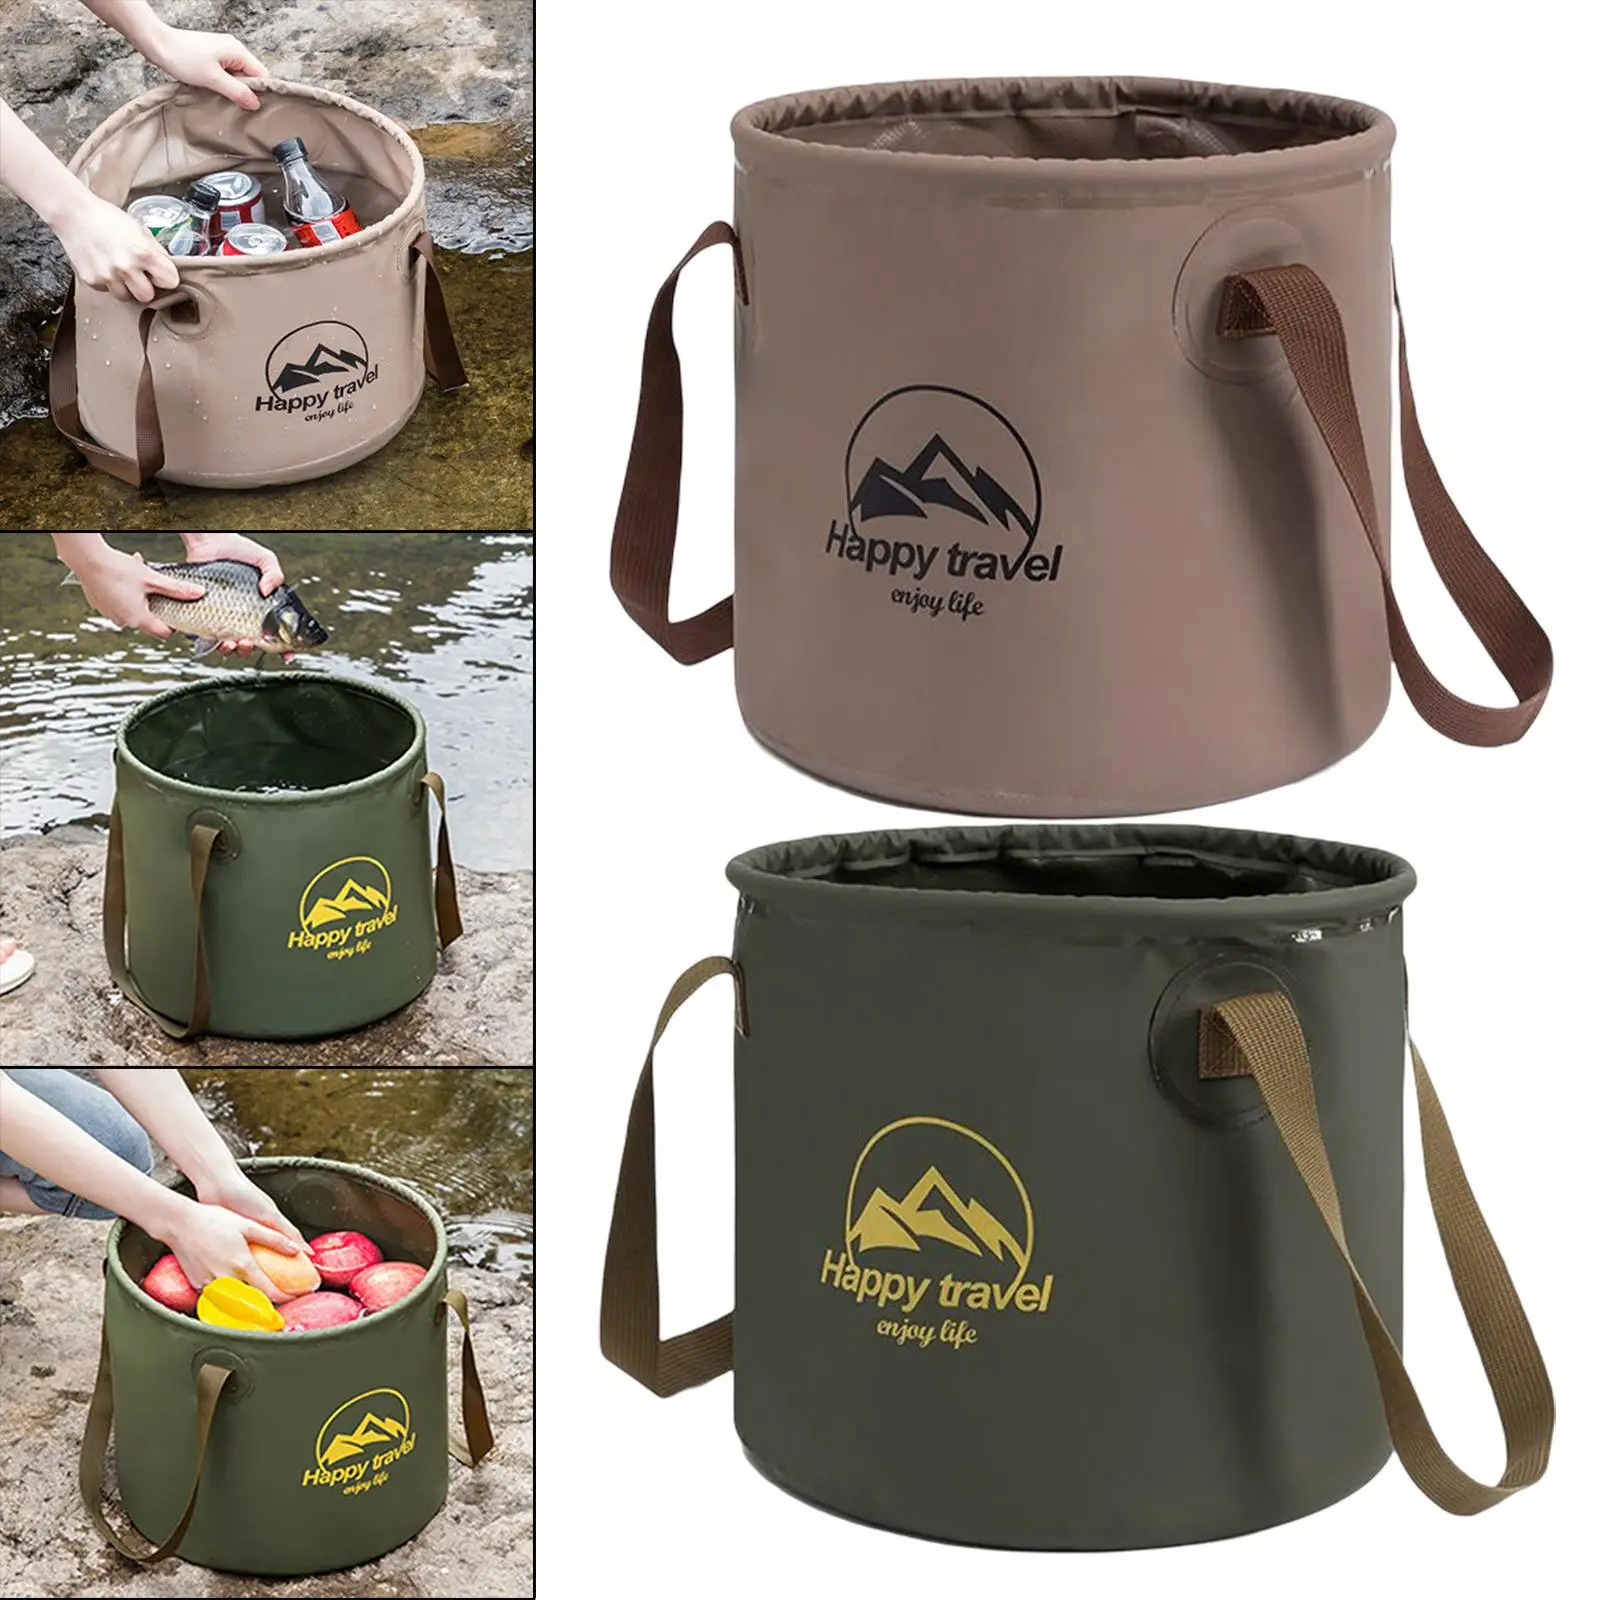 Collapsible Bucket Foldable Water Storage Container Fishing Bucket Wash Basin for Camping Travelling Outdoor Fishing Car Washing